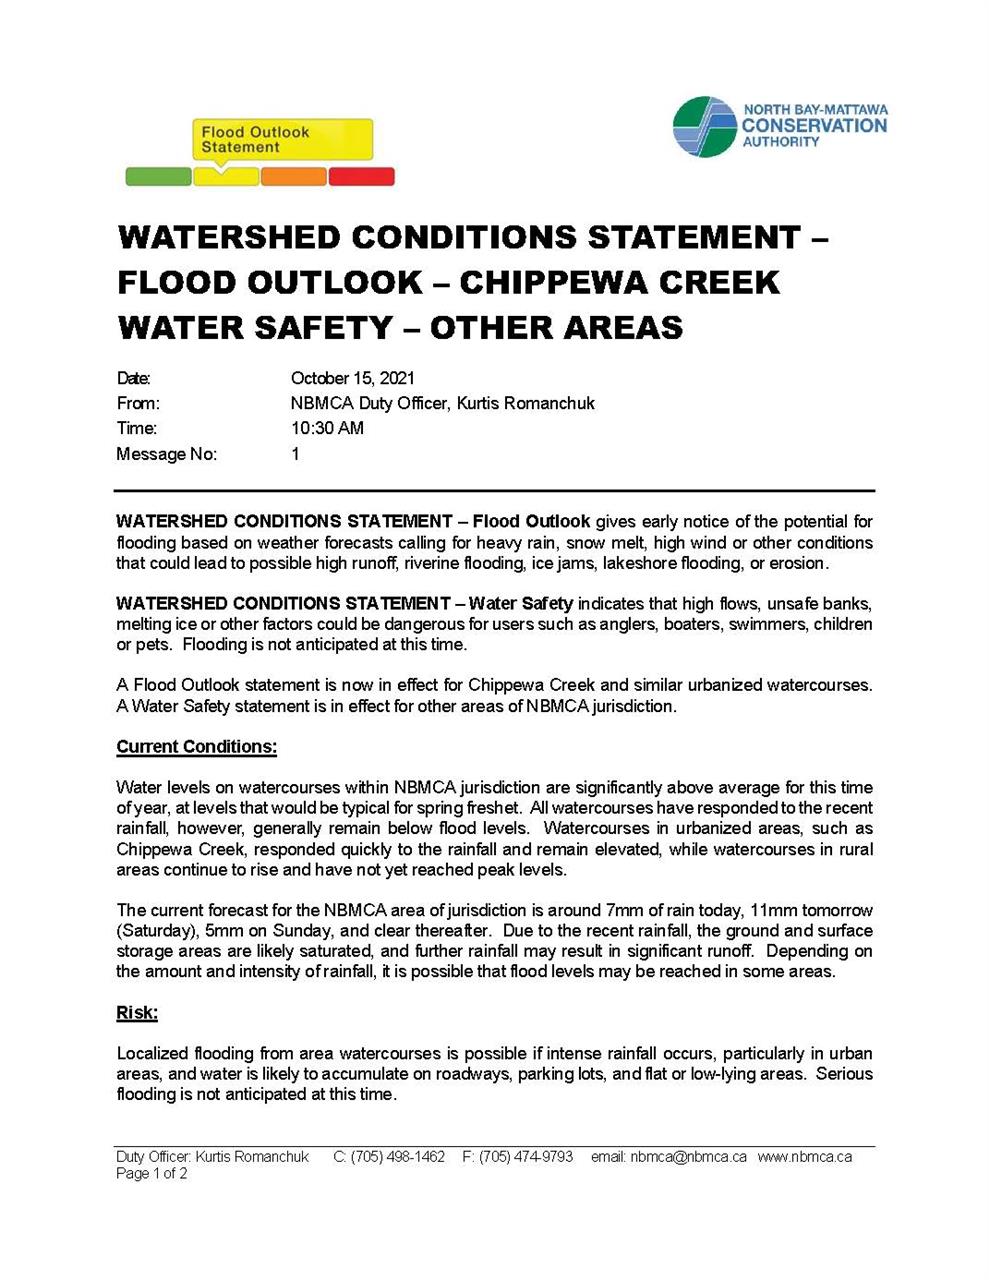 WATERSHED CONDITIONS STATEMENT – FLOOD OUTLOOK – CHIPPEWA CREEK WATER SAFETY – OTHER AREAS